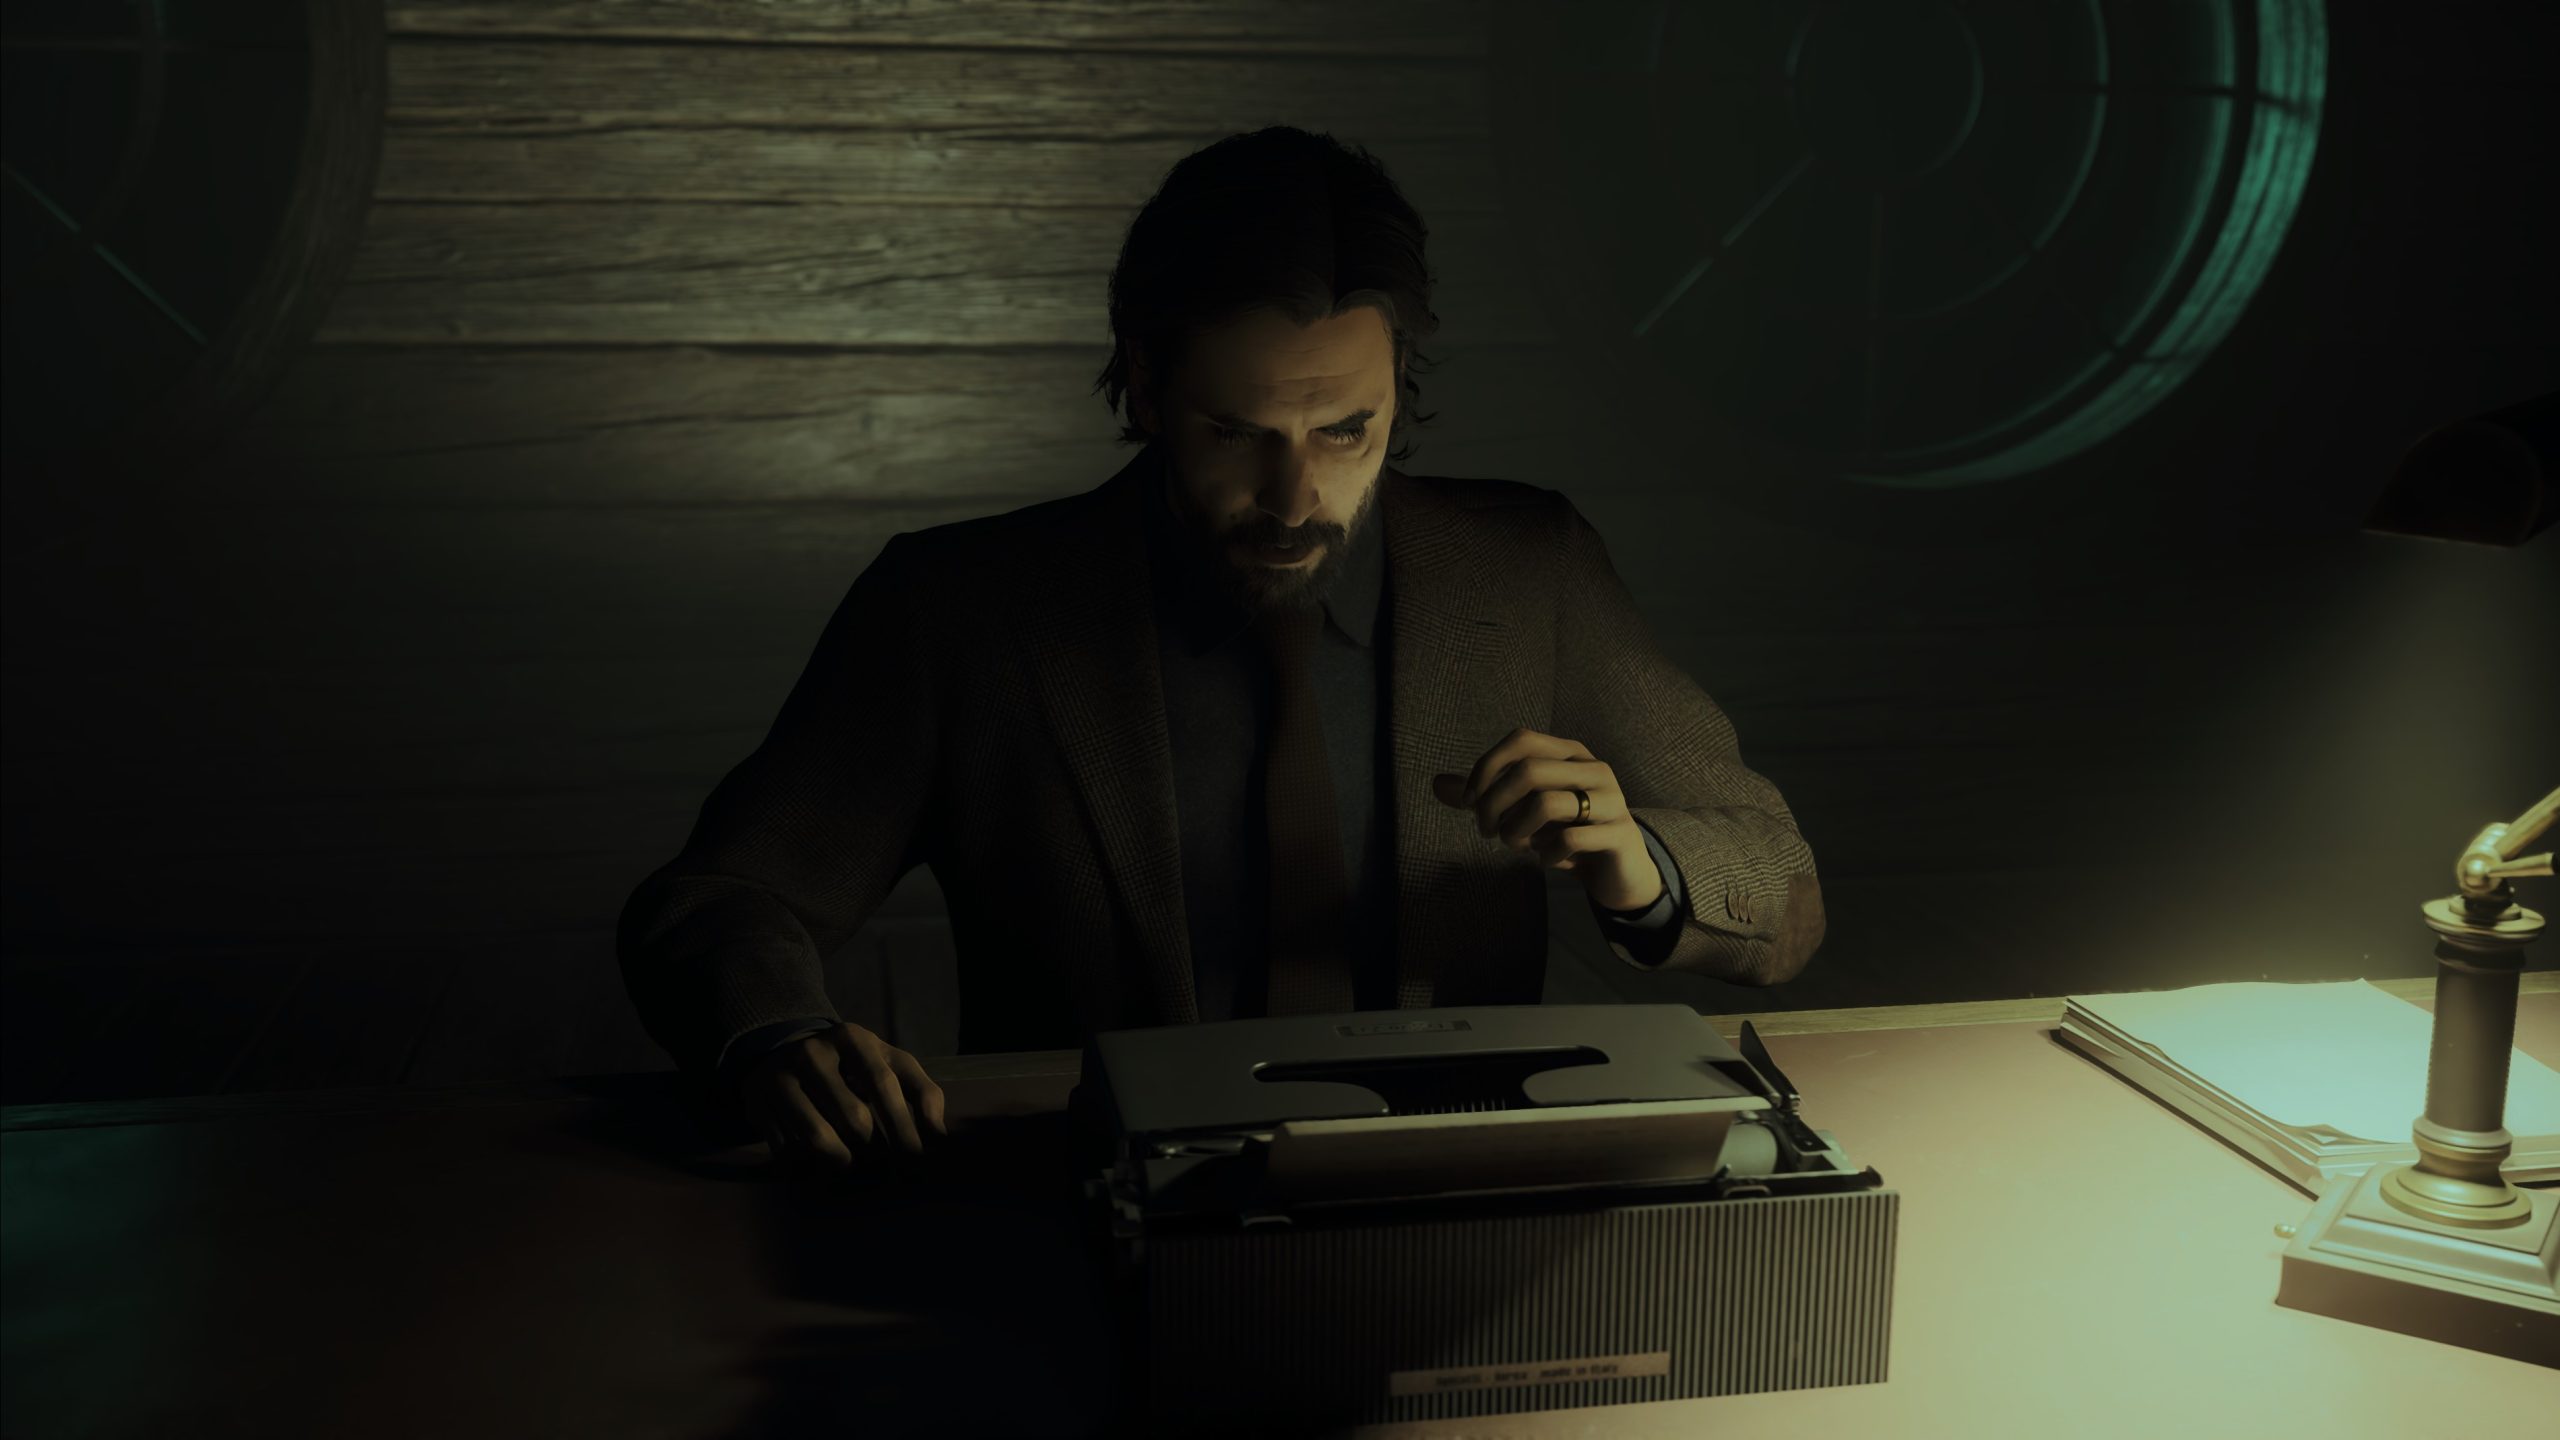 Alan Wake 2 News: Unexpected Testing Results on PC and PS5. Gaming